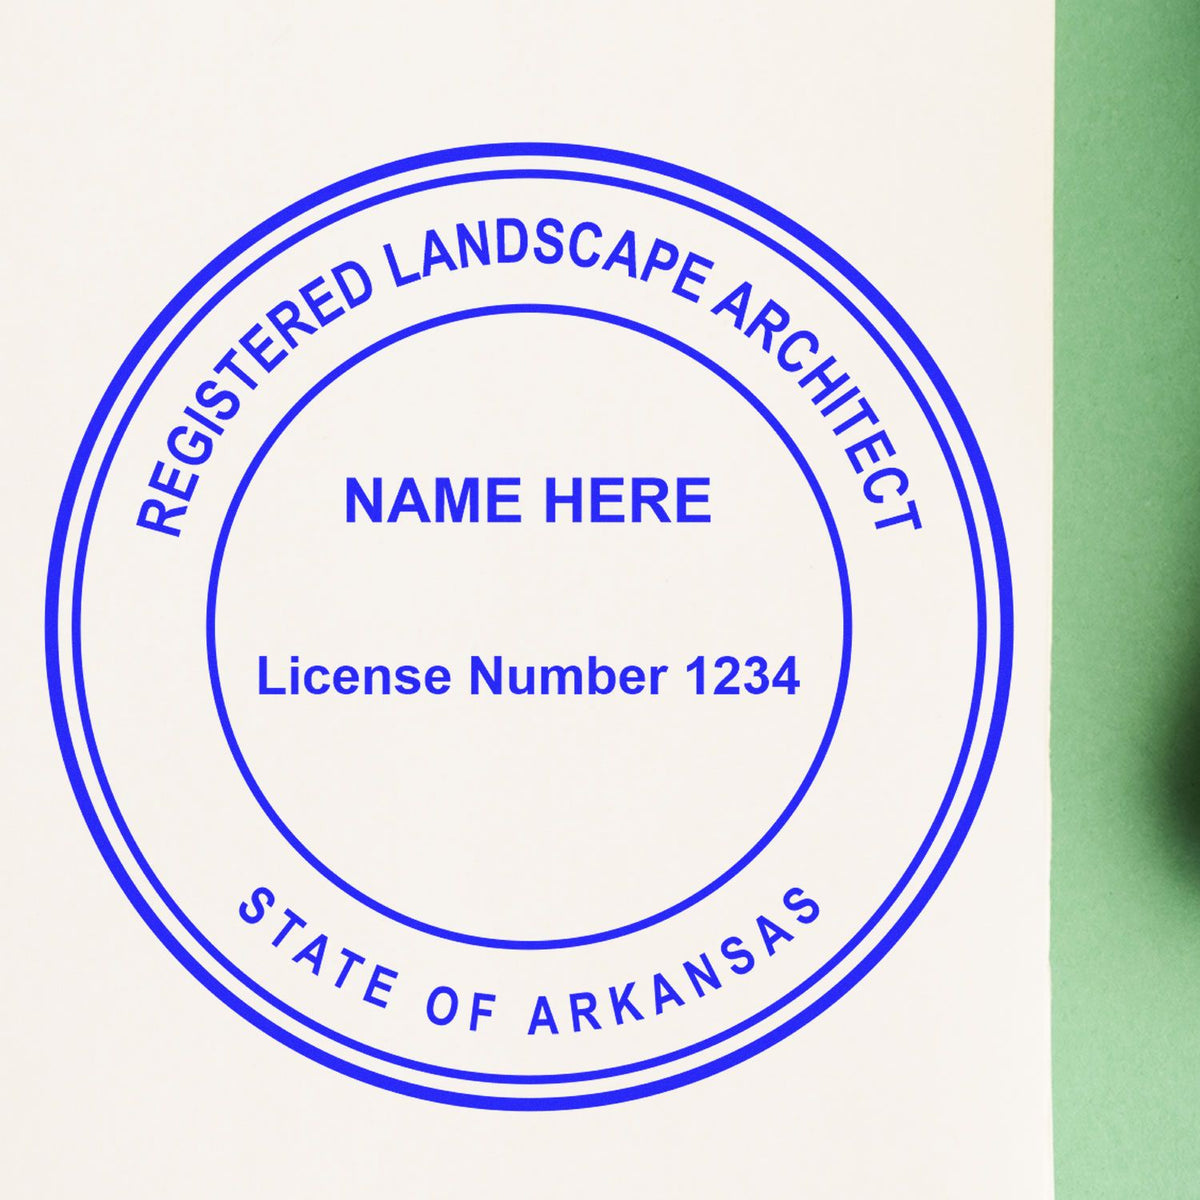 The Slim Pre-Inked Arkansas Landscape Architect Seal Stamp stamp impression comes to life with a crisp, detailed photo on paper - showcasing true professional quality.